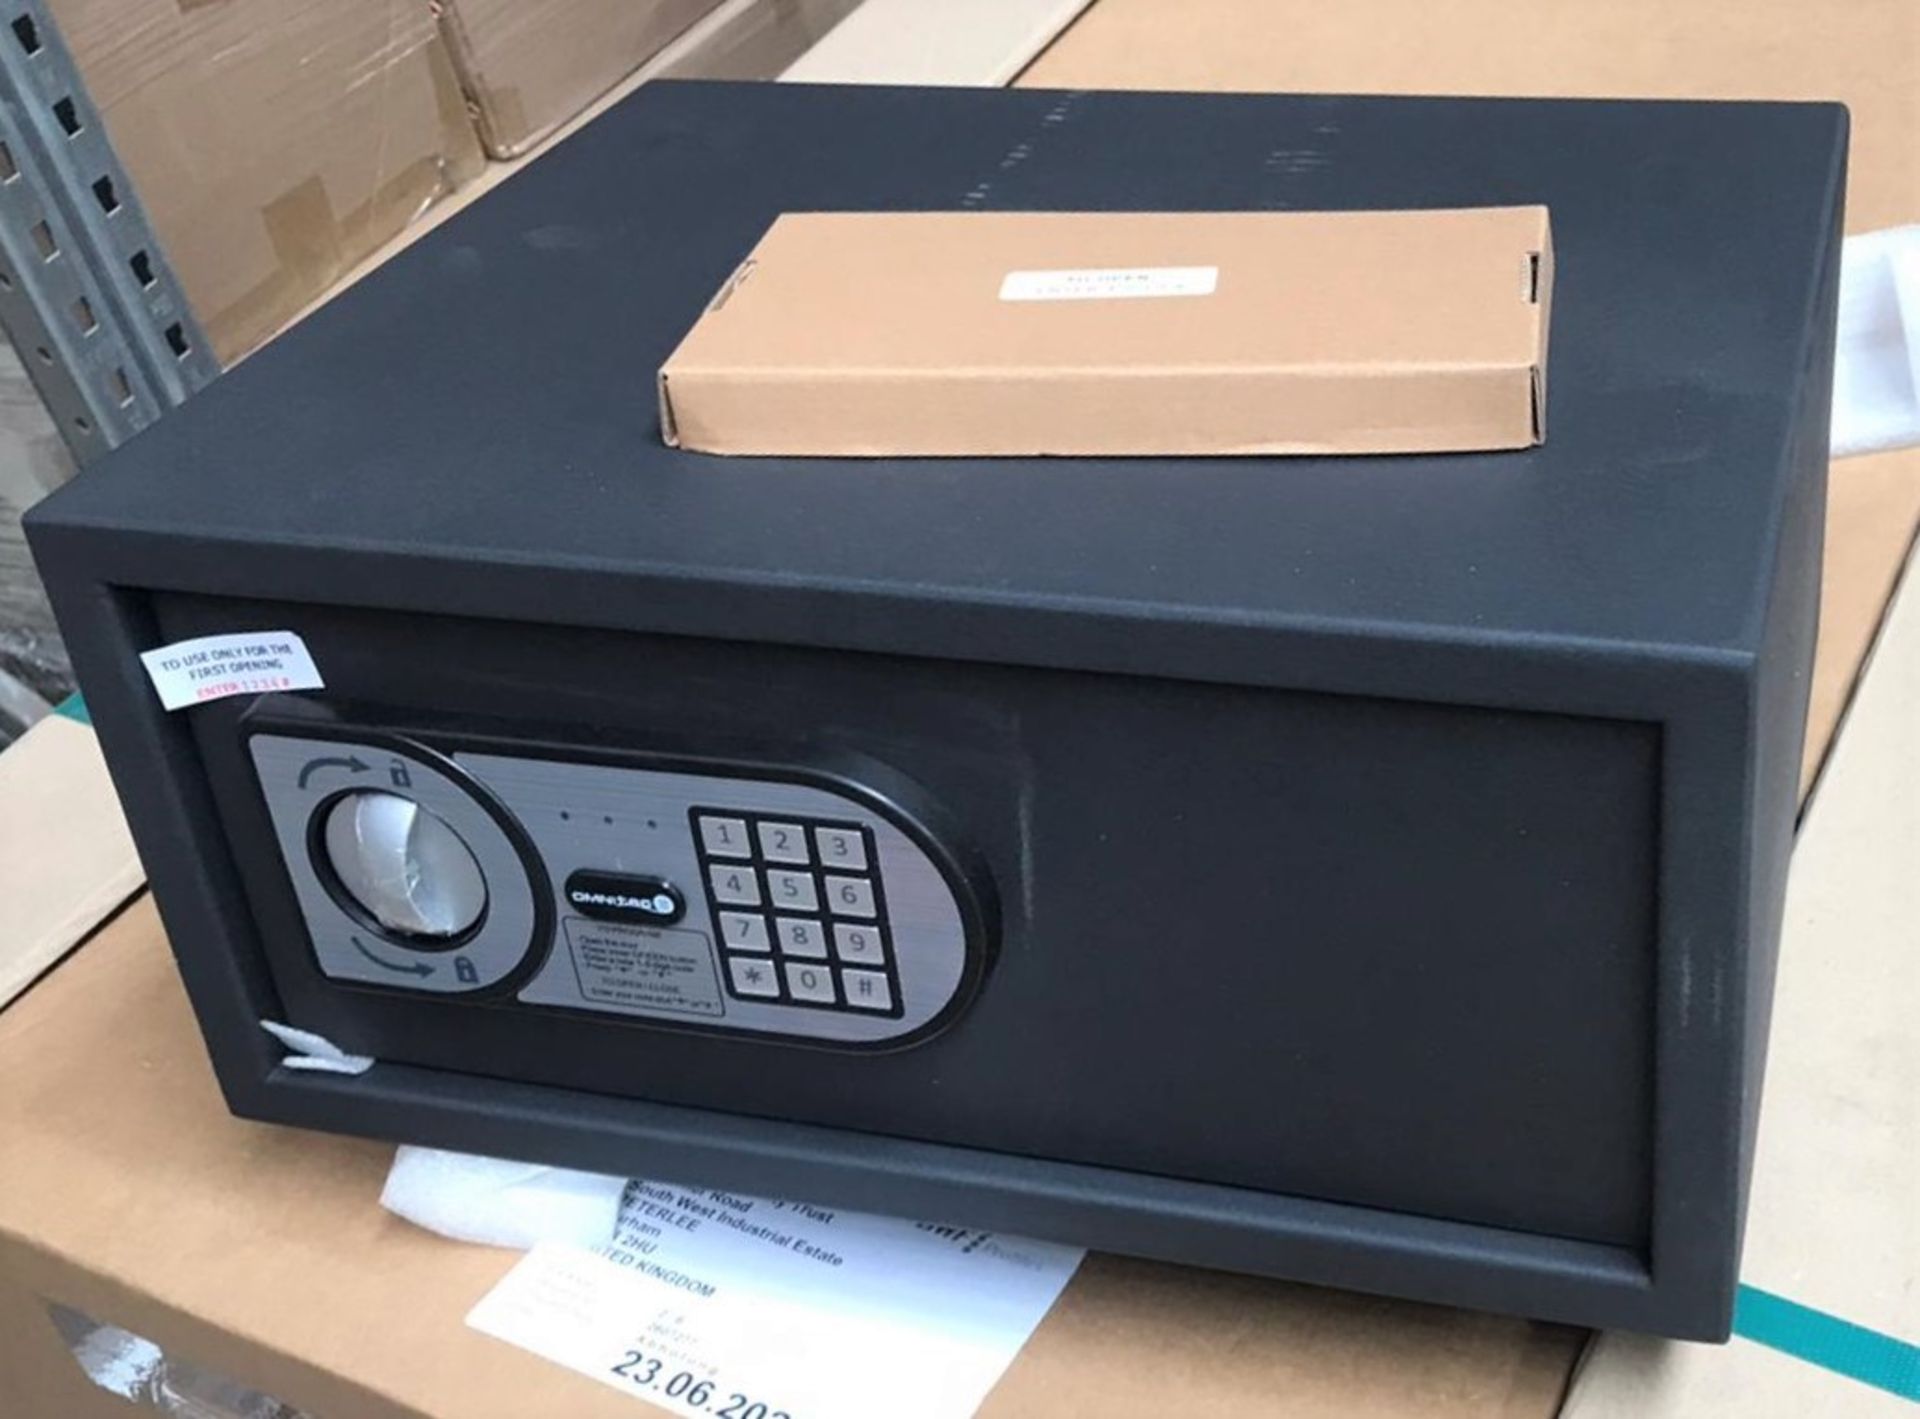 1 x Omnitec Safeguard Security Safe With Keypad Opening - Model Laptop 15 - Size H20 x W43 x D35 cms - Image 2 of 6